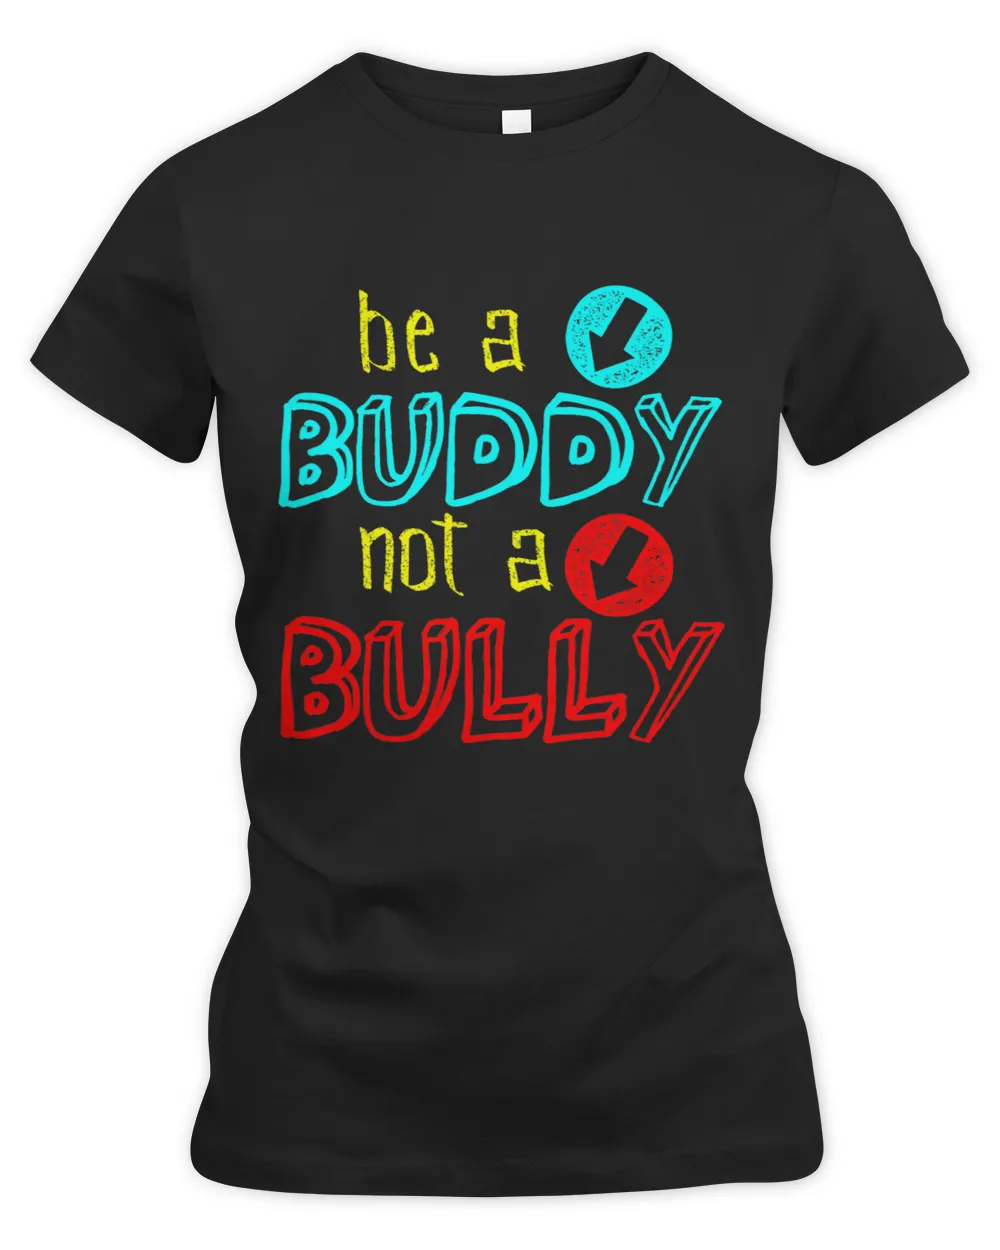 Anti Bullying Positive Message Be A Buddy Not A Bully